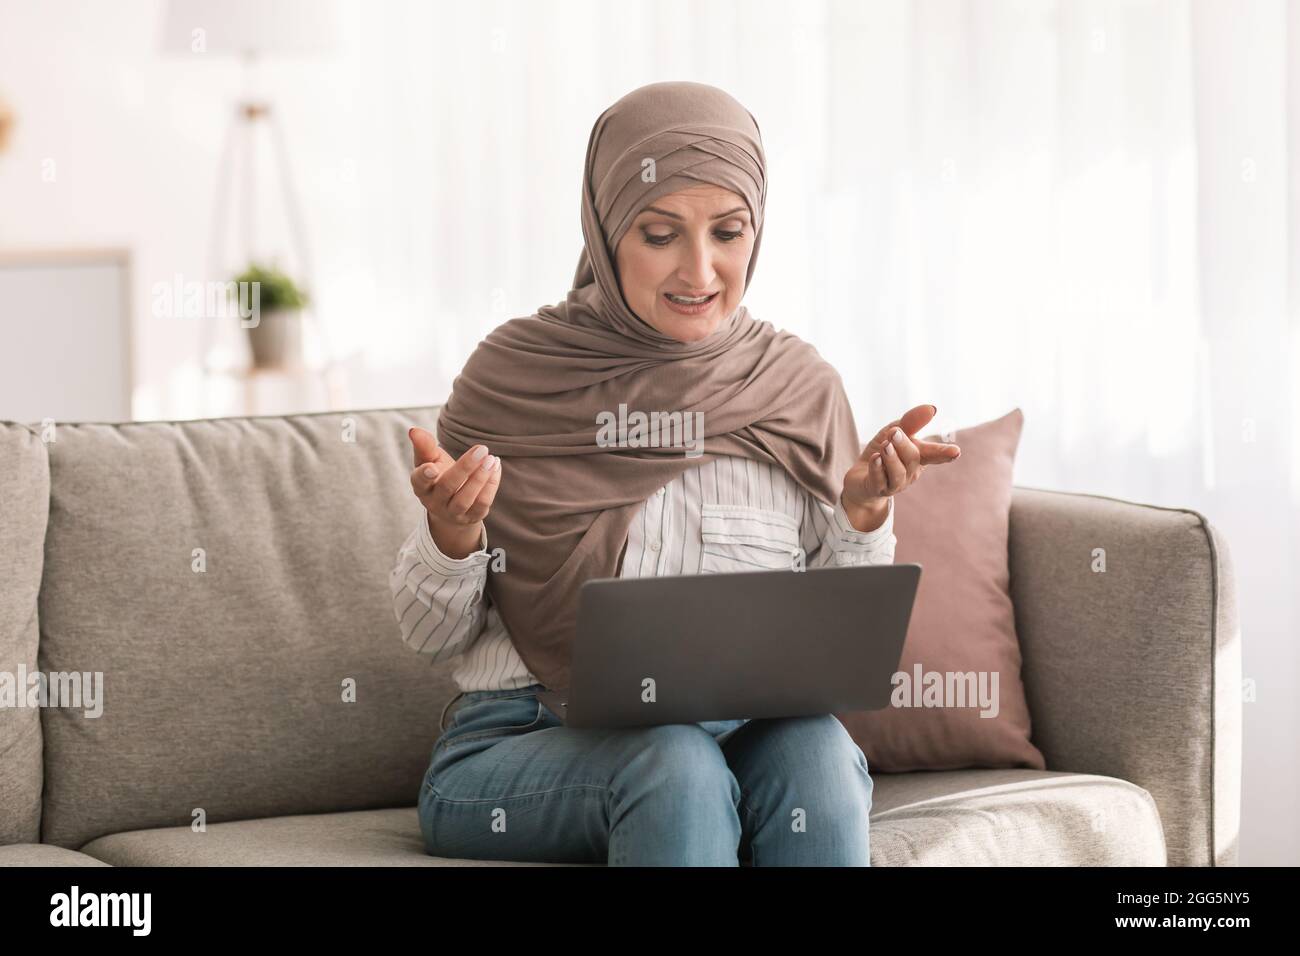 Middle-Eastern Woman Video Calling Using Laptop Sitting On Sofa Indoor Stock Photo